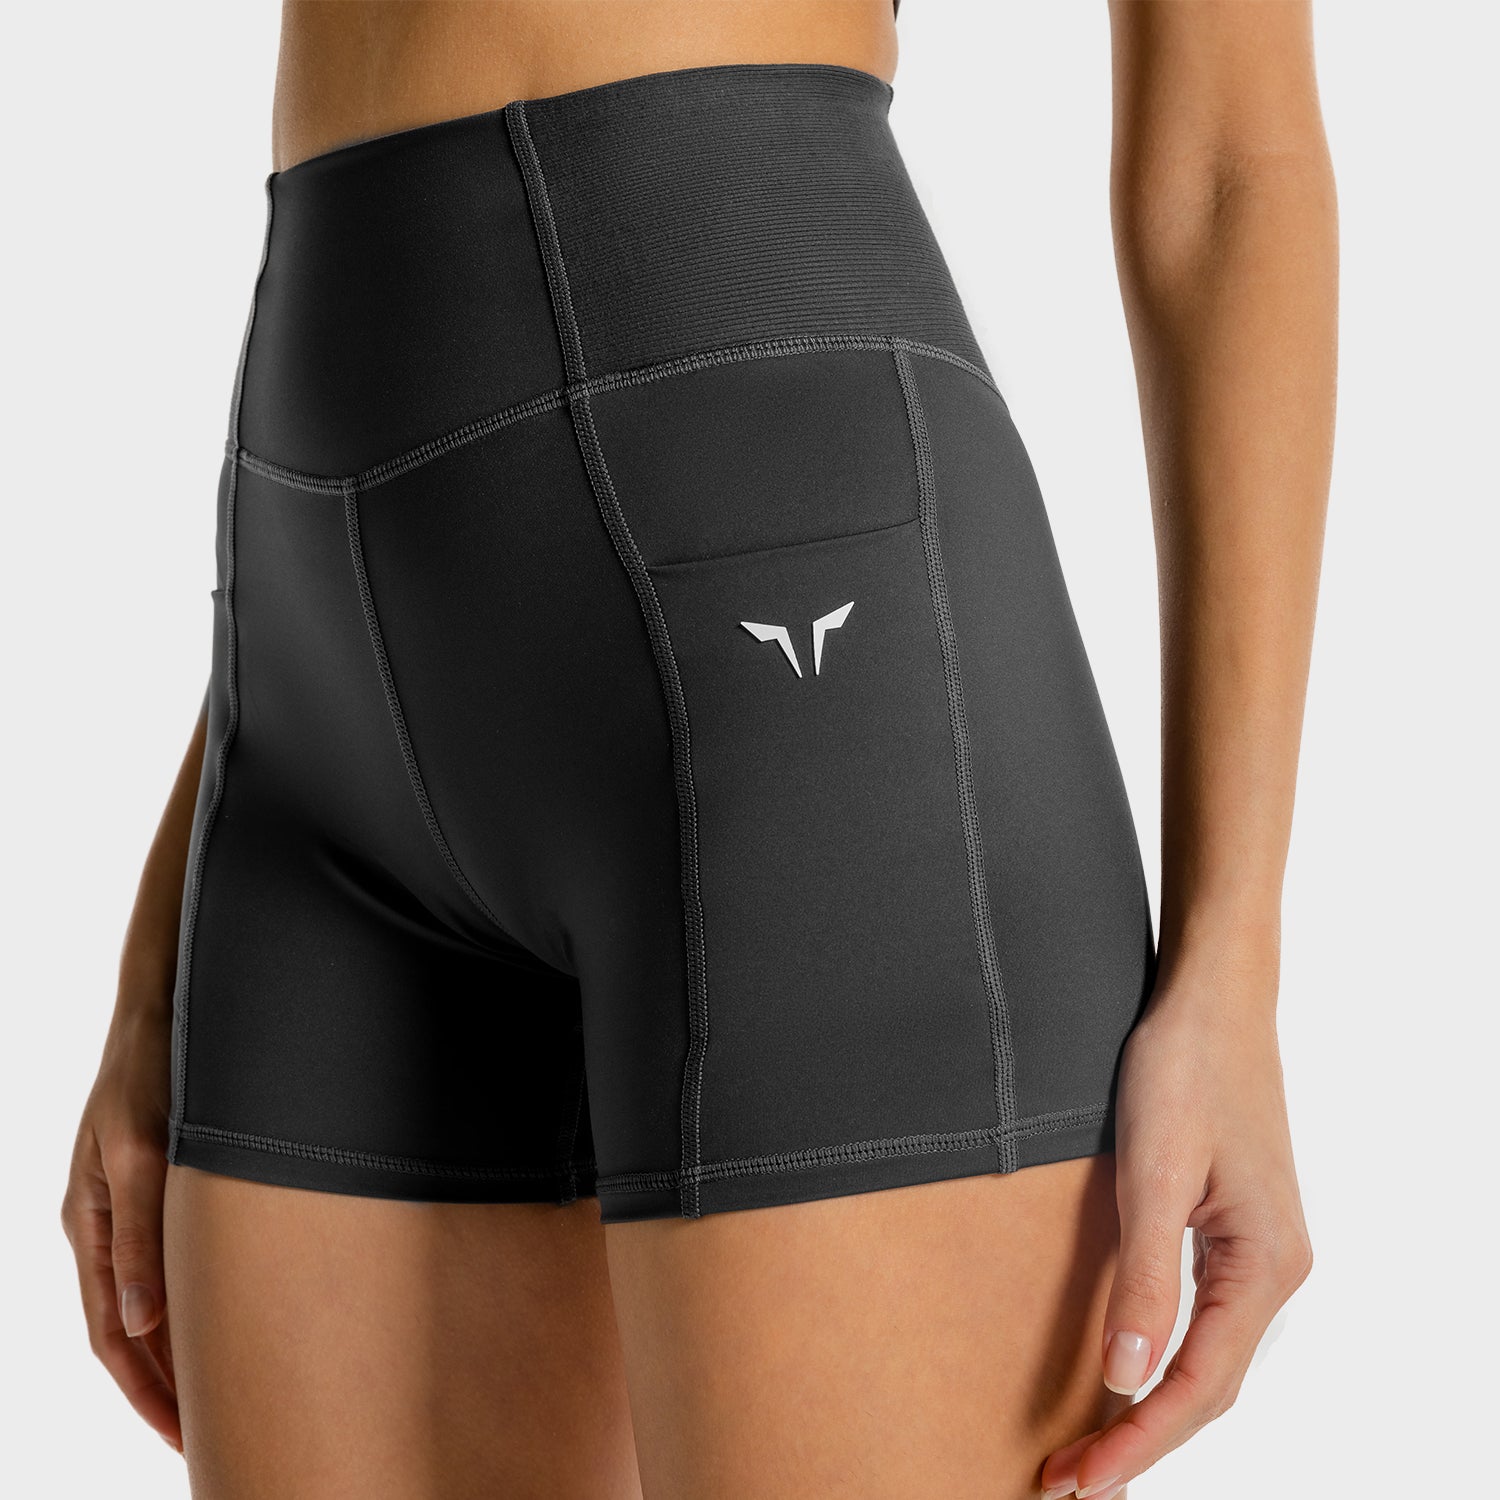 squatwolf-workout-clothes-core-performance-shorts-charcoal-gym-shorts-for-women